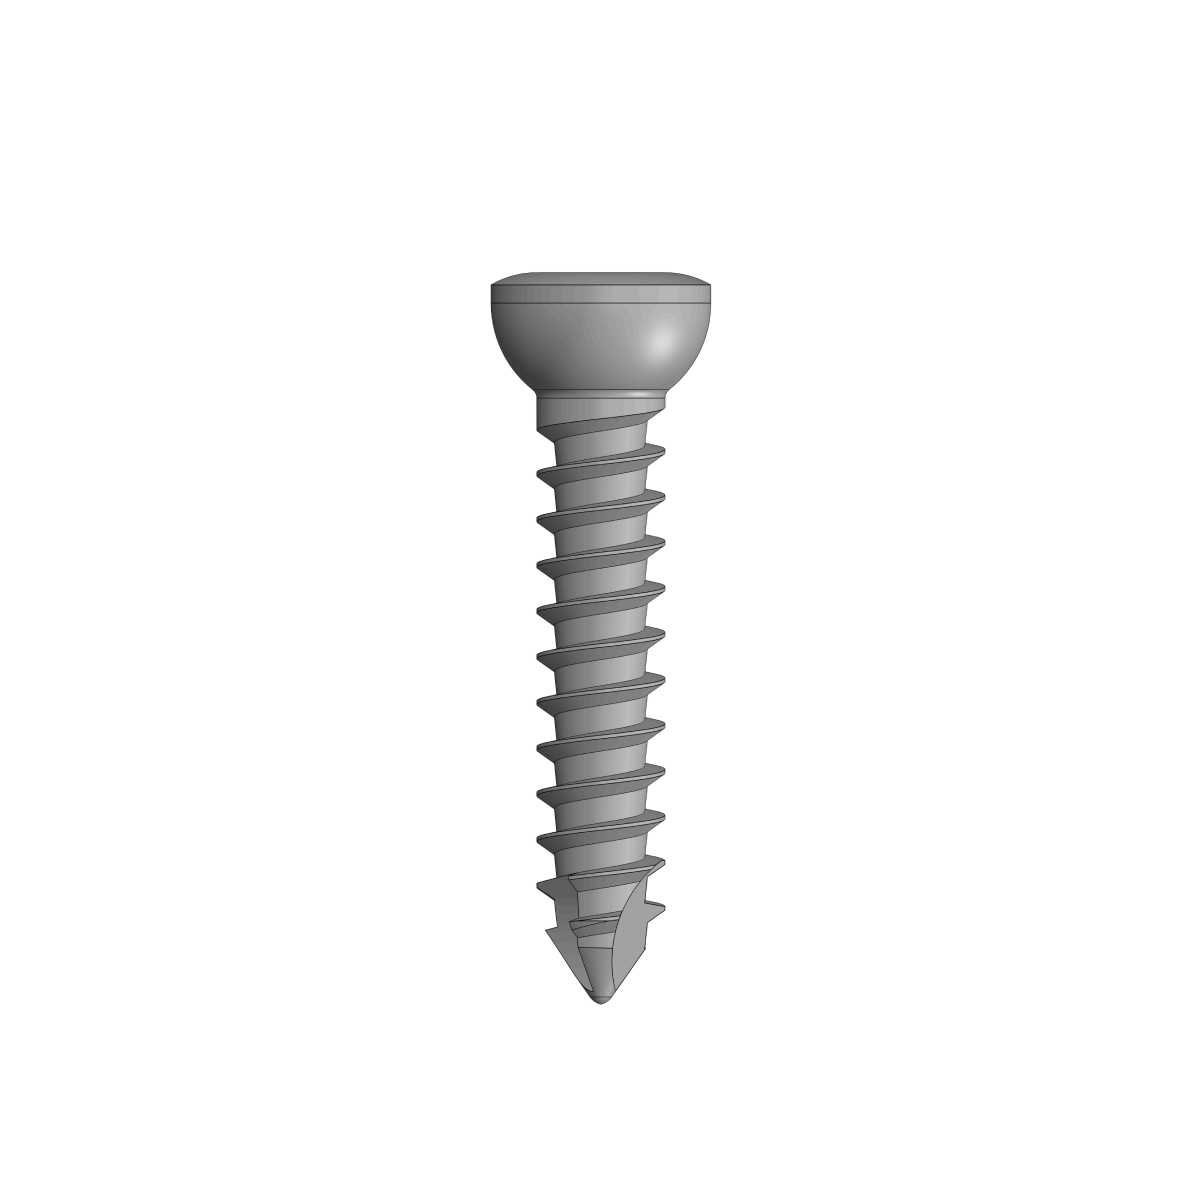 Cortical-Screw-3.5mm-Dia.-Self-Tapping